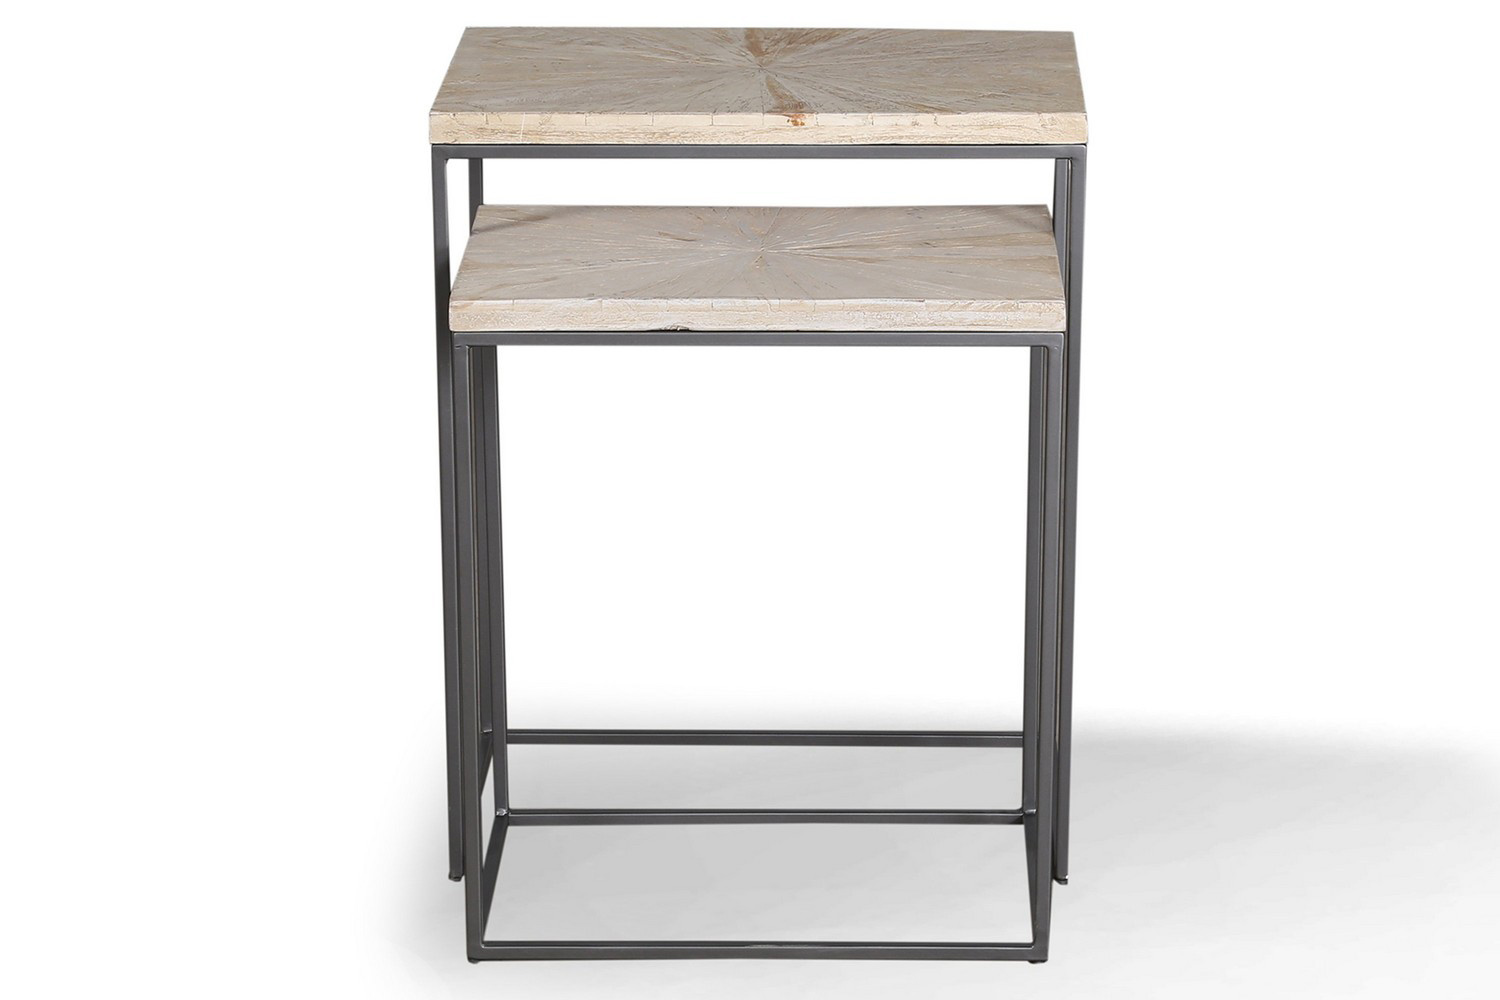 Parker House Crossings Monaco Chairside Nesting Table - Weathered Blanc